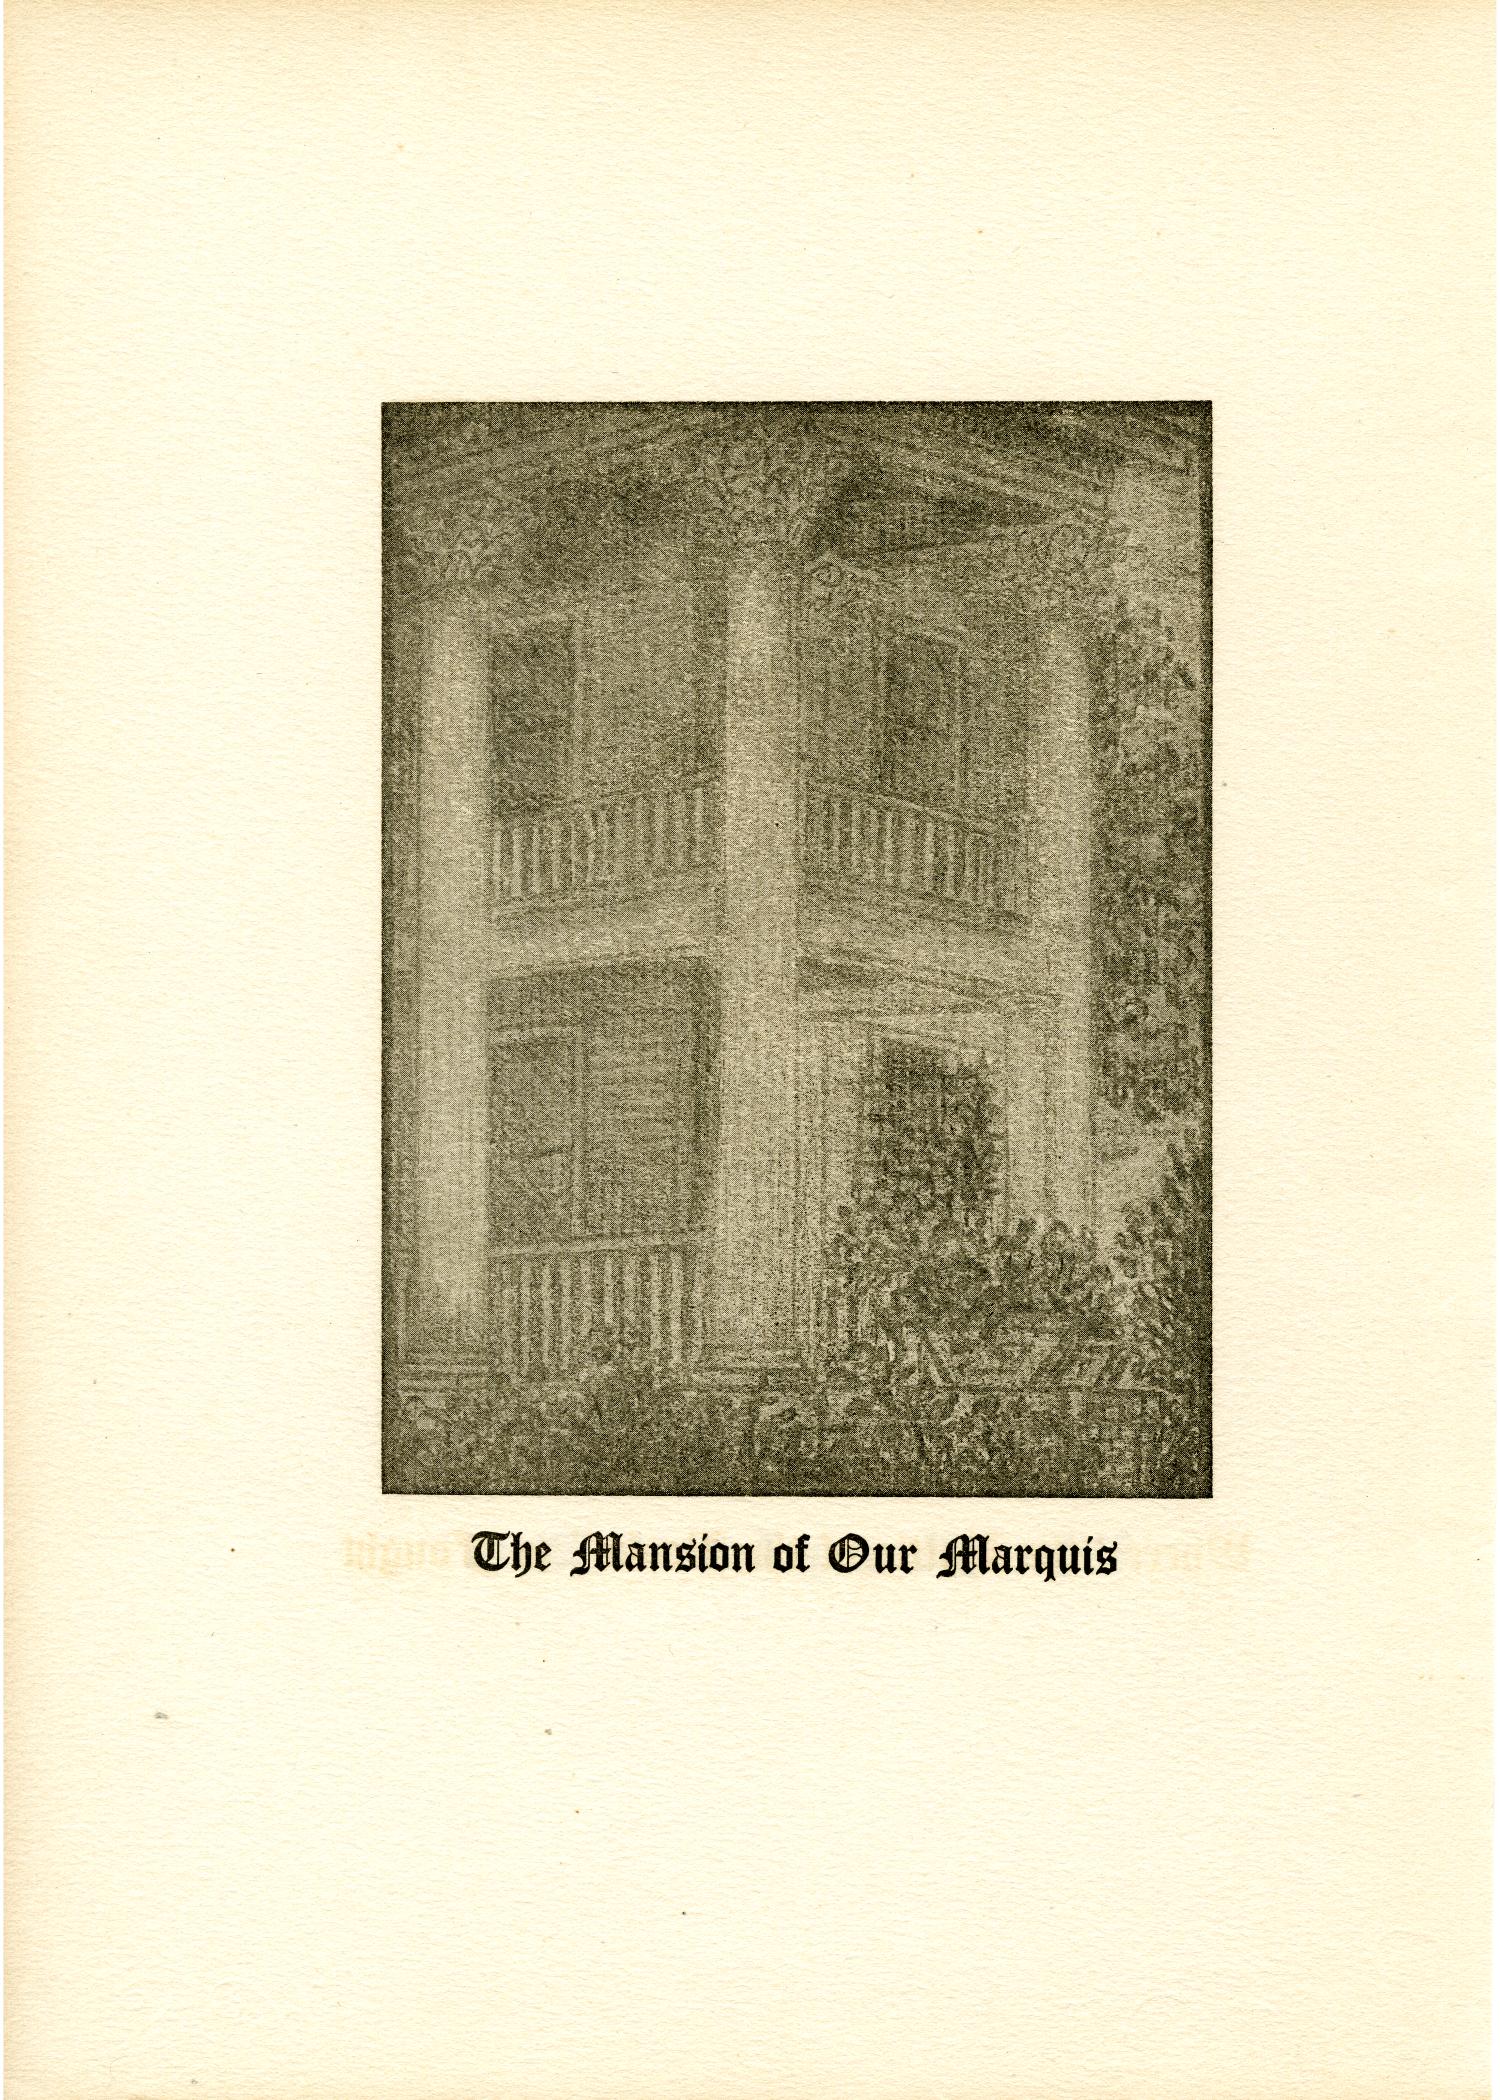 The Yucca, Yearbook of North Texas State Teacher's School, 1924
                                                
                                                    12
                                                